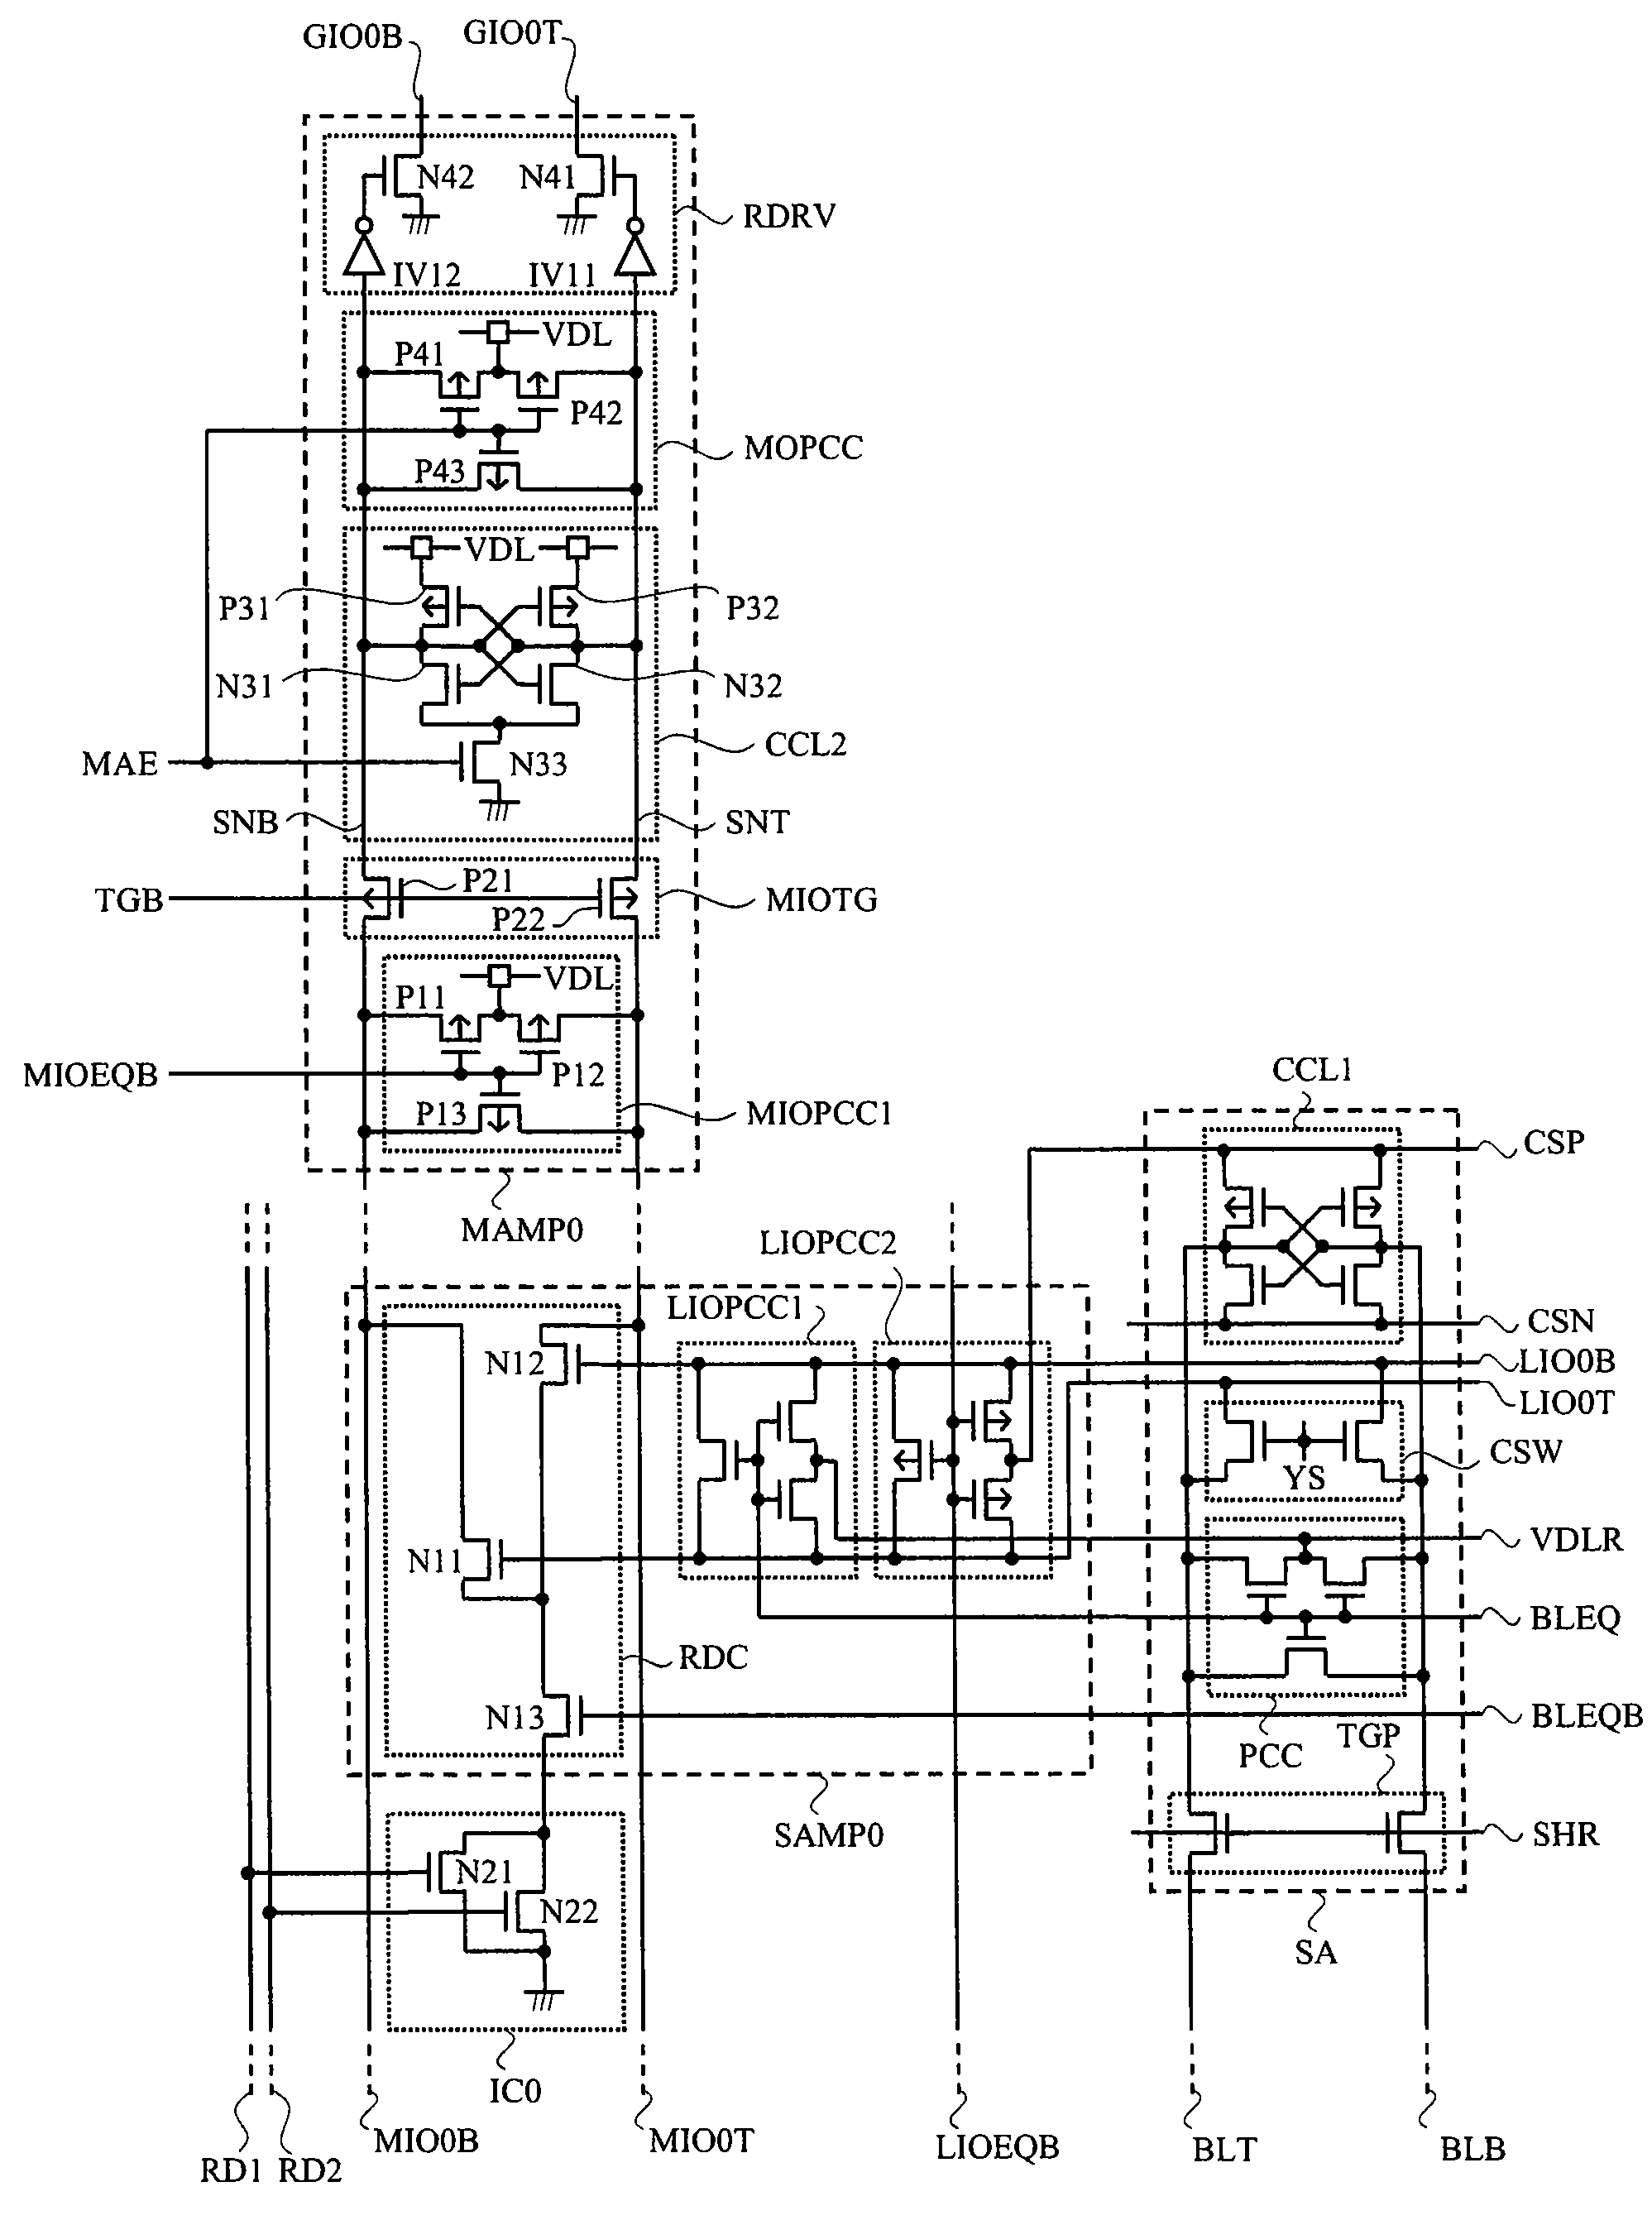 Semiconductor memory device with sub-amplifiers having a variable current source